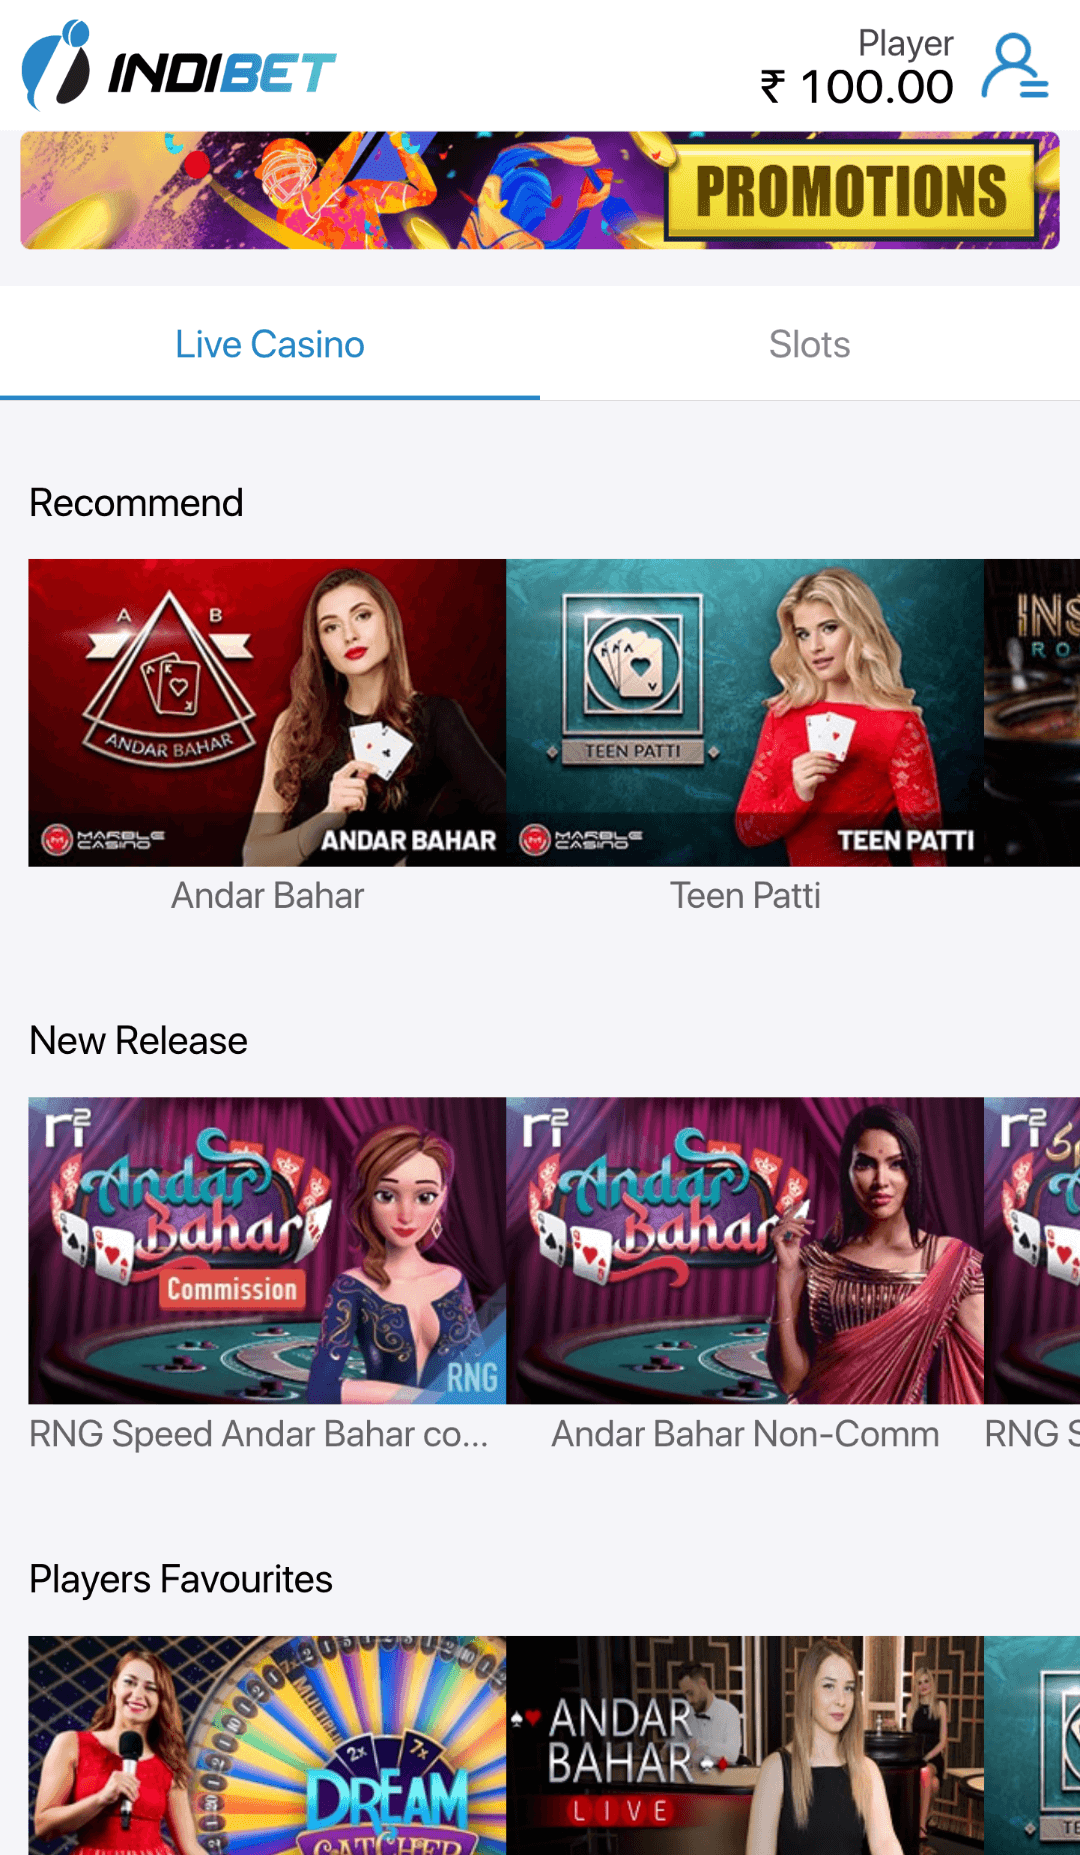 A separate casino section in the Indibet app